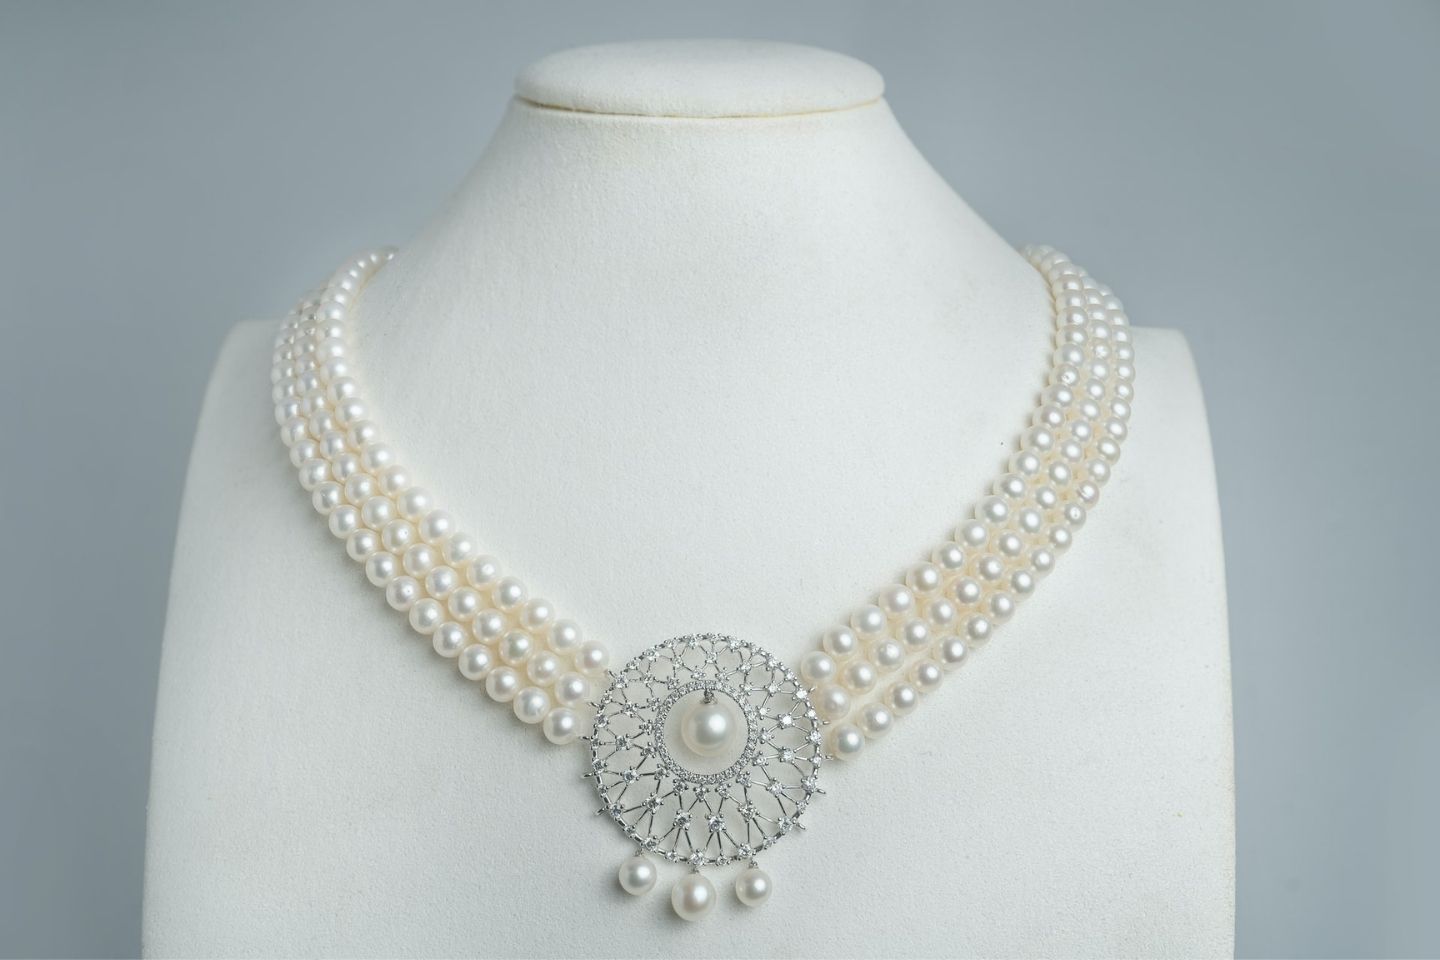 Pearl Jewellery Shopping Places in Hyderabad